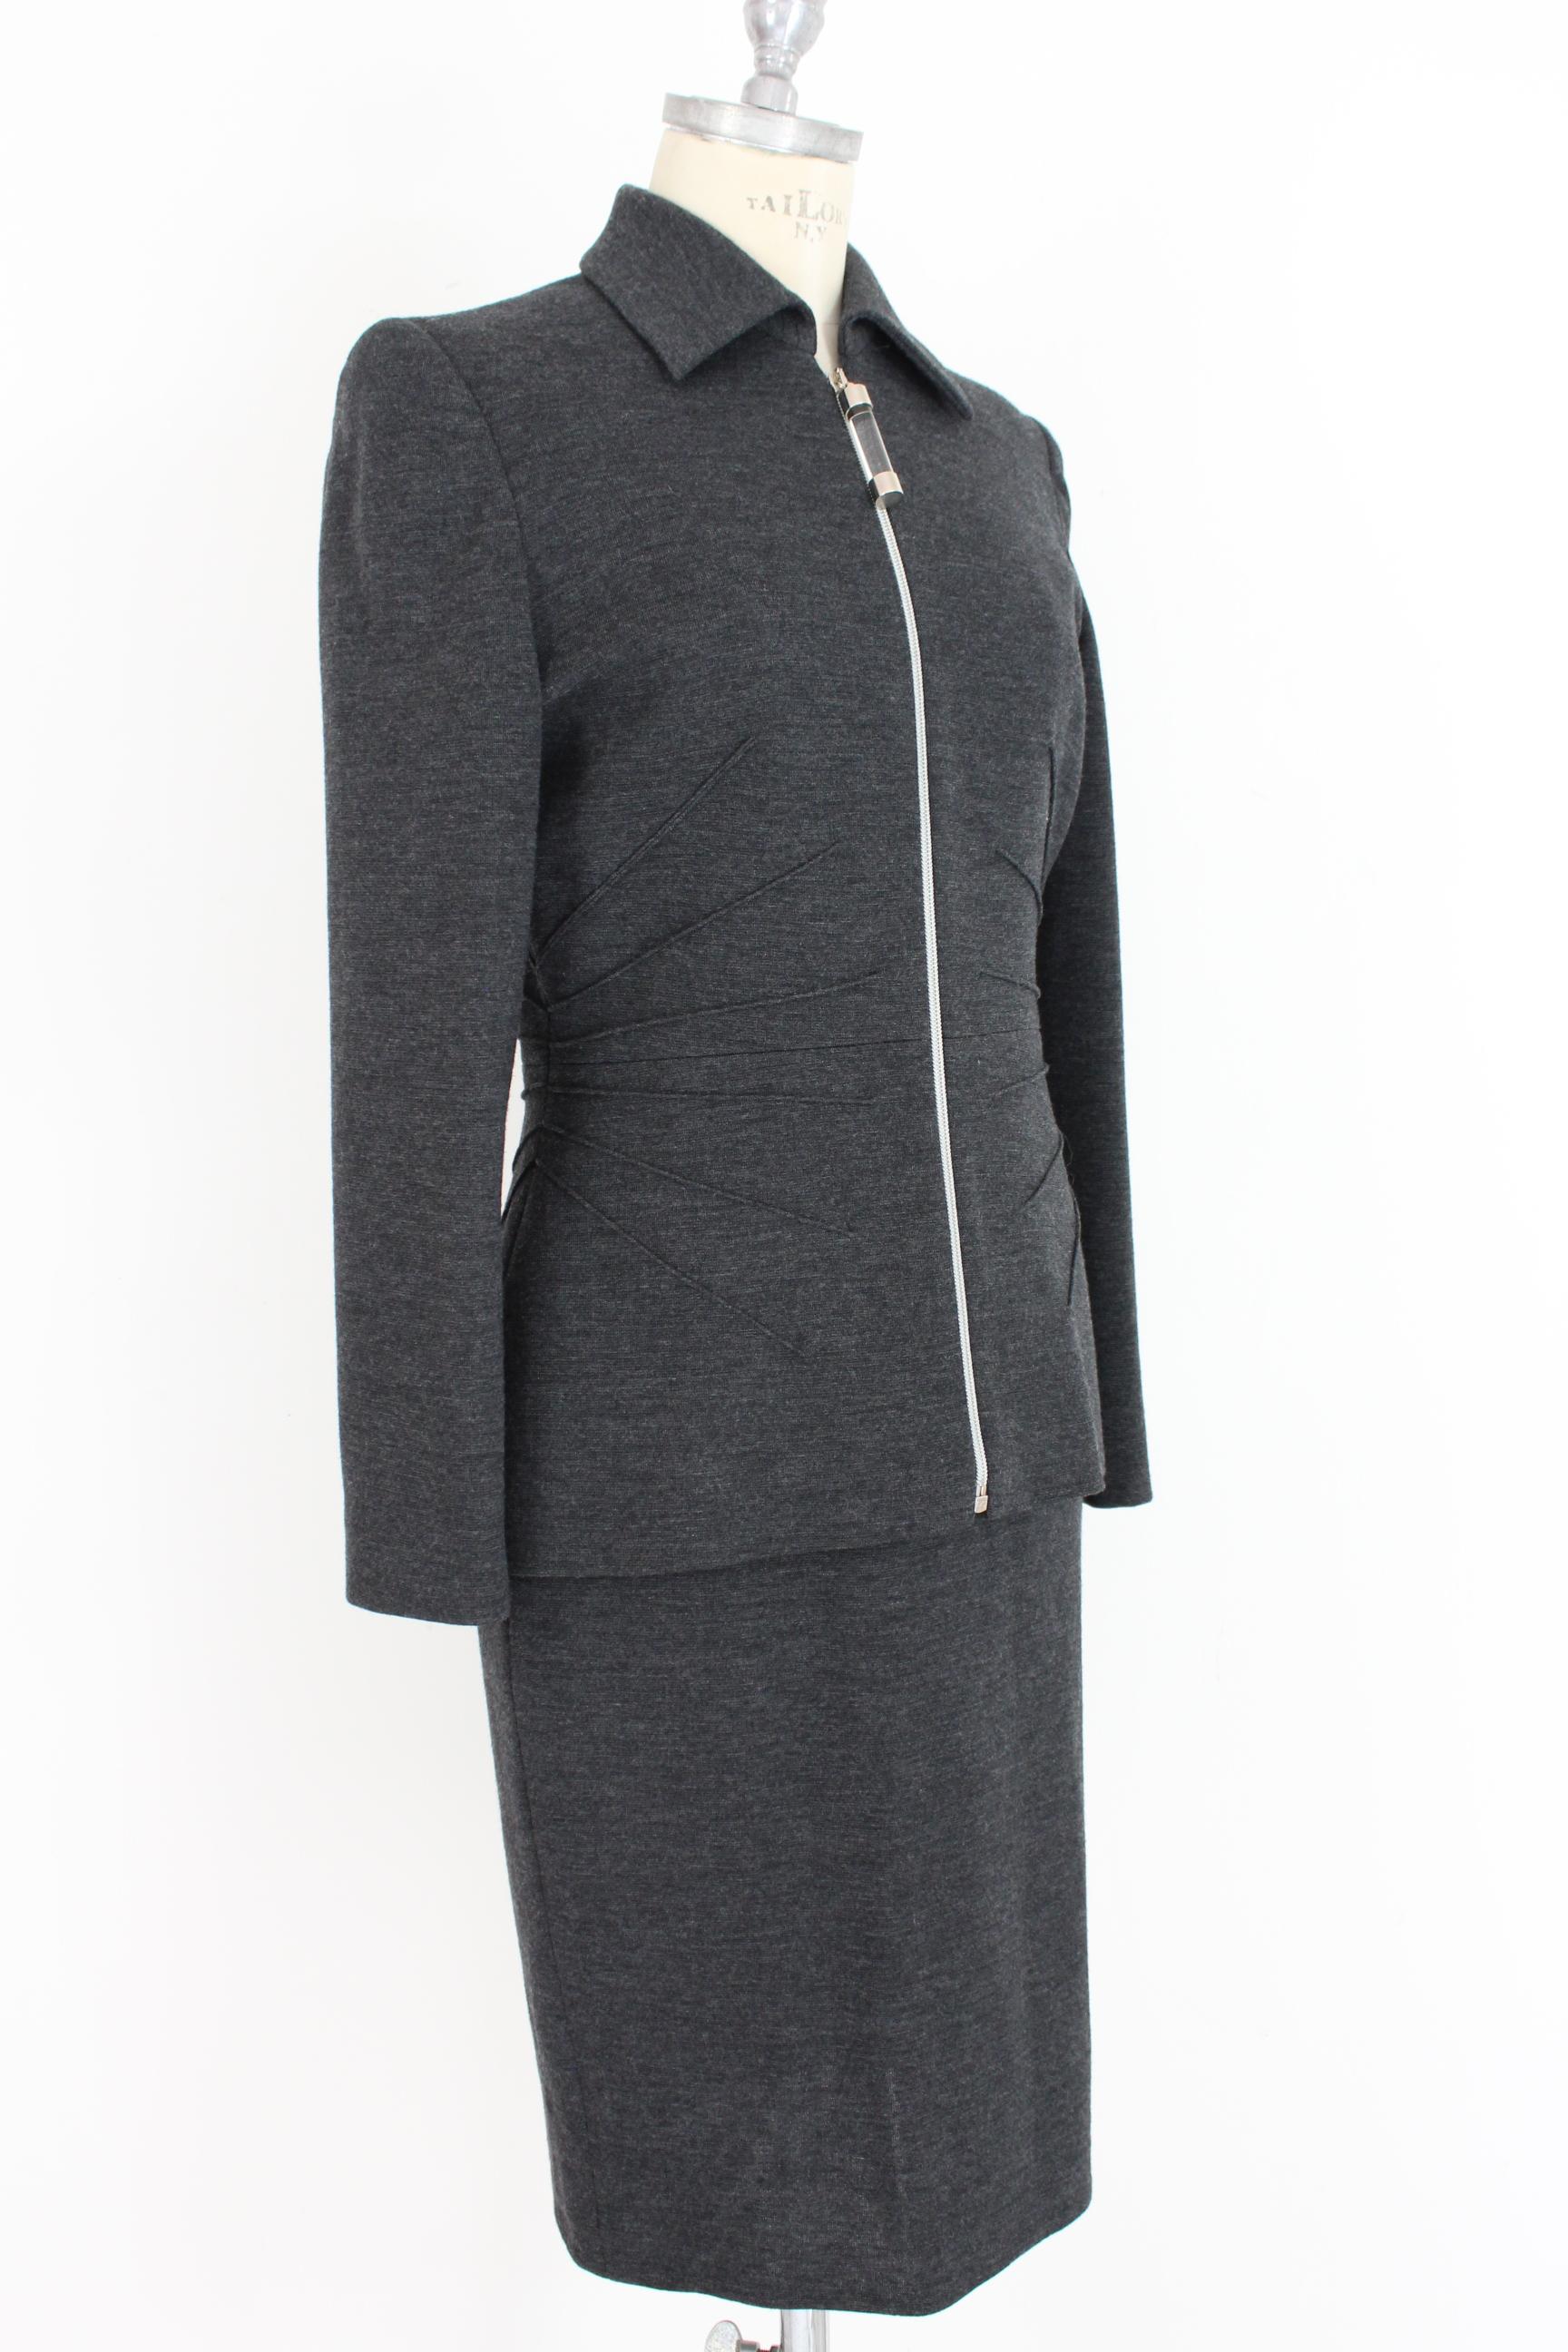 Gai Mattiolo Wool Gray Casual Suit Skirt and Jacket  In Excellent Condition For Sale In Brindisi, Bt